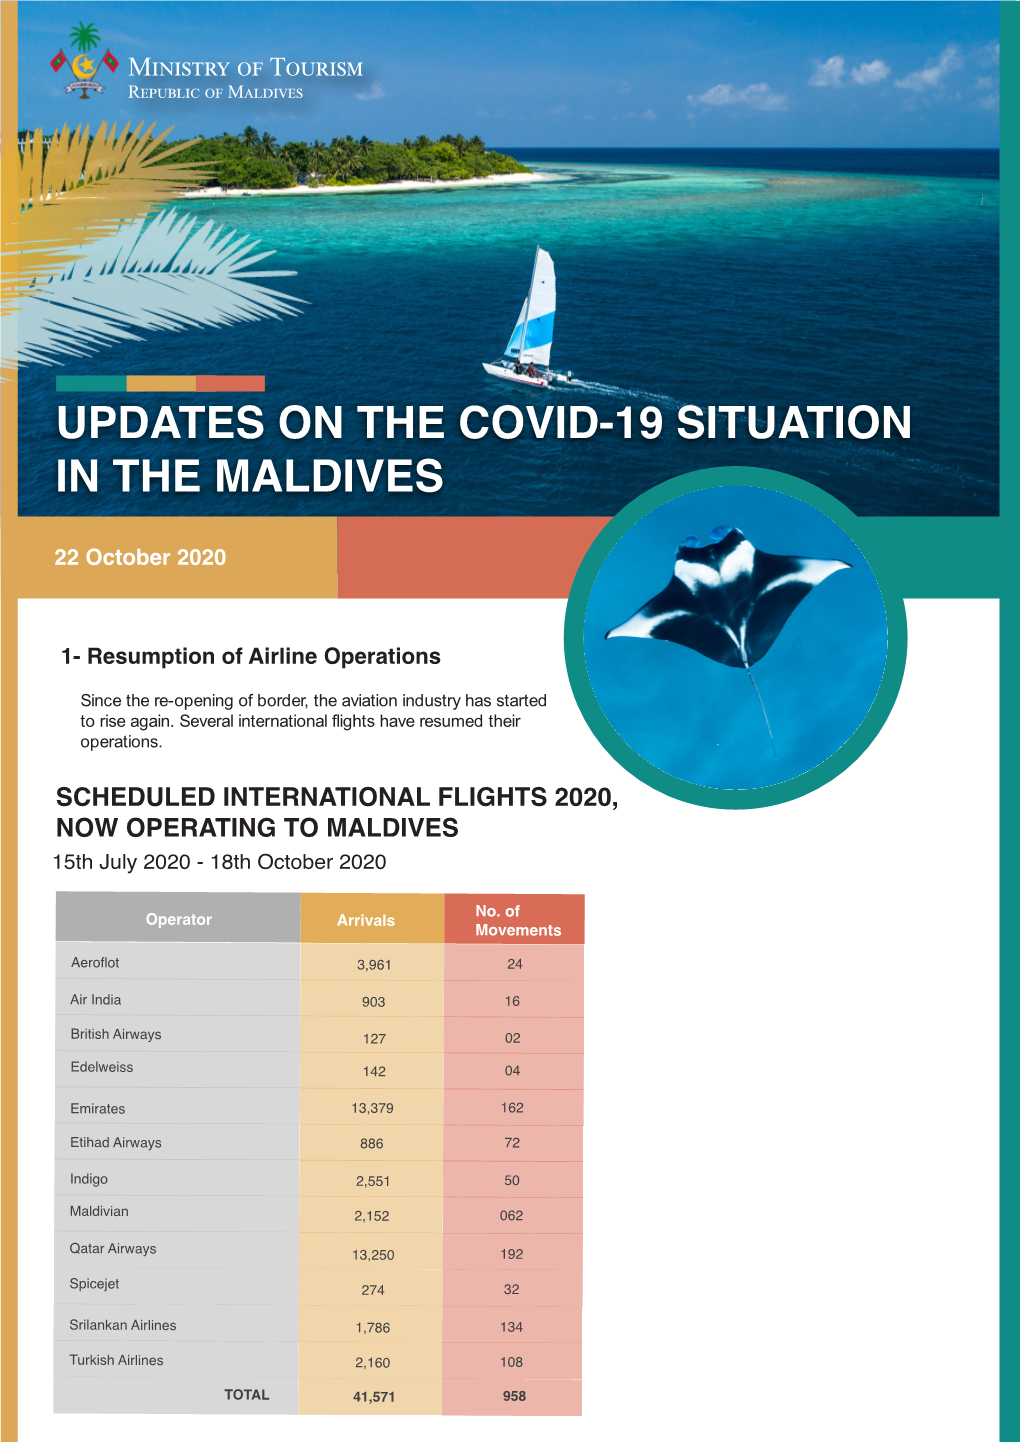 Updates on the Covid-19 Situation in the Maldives